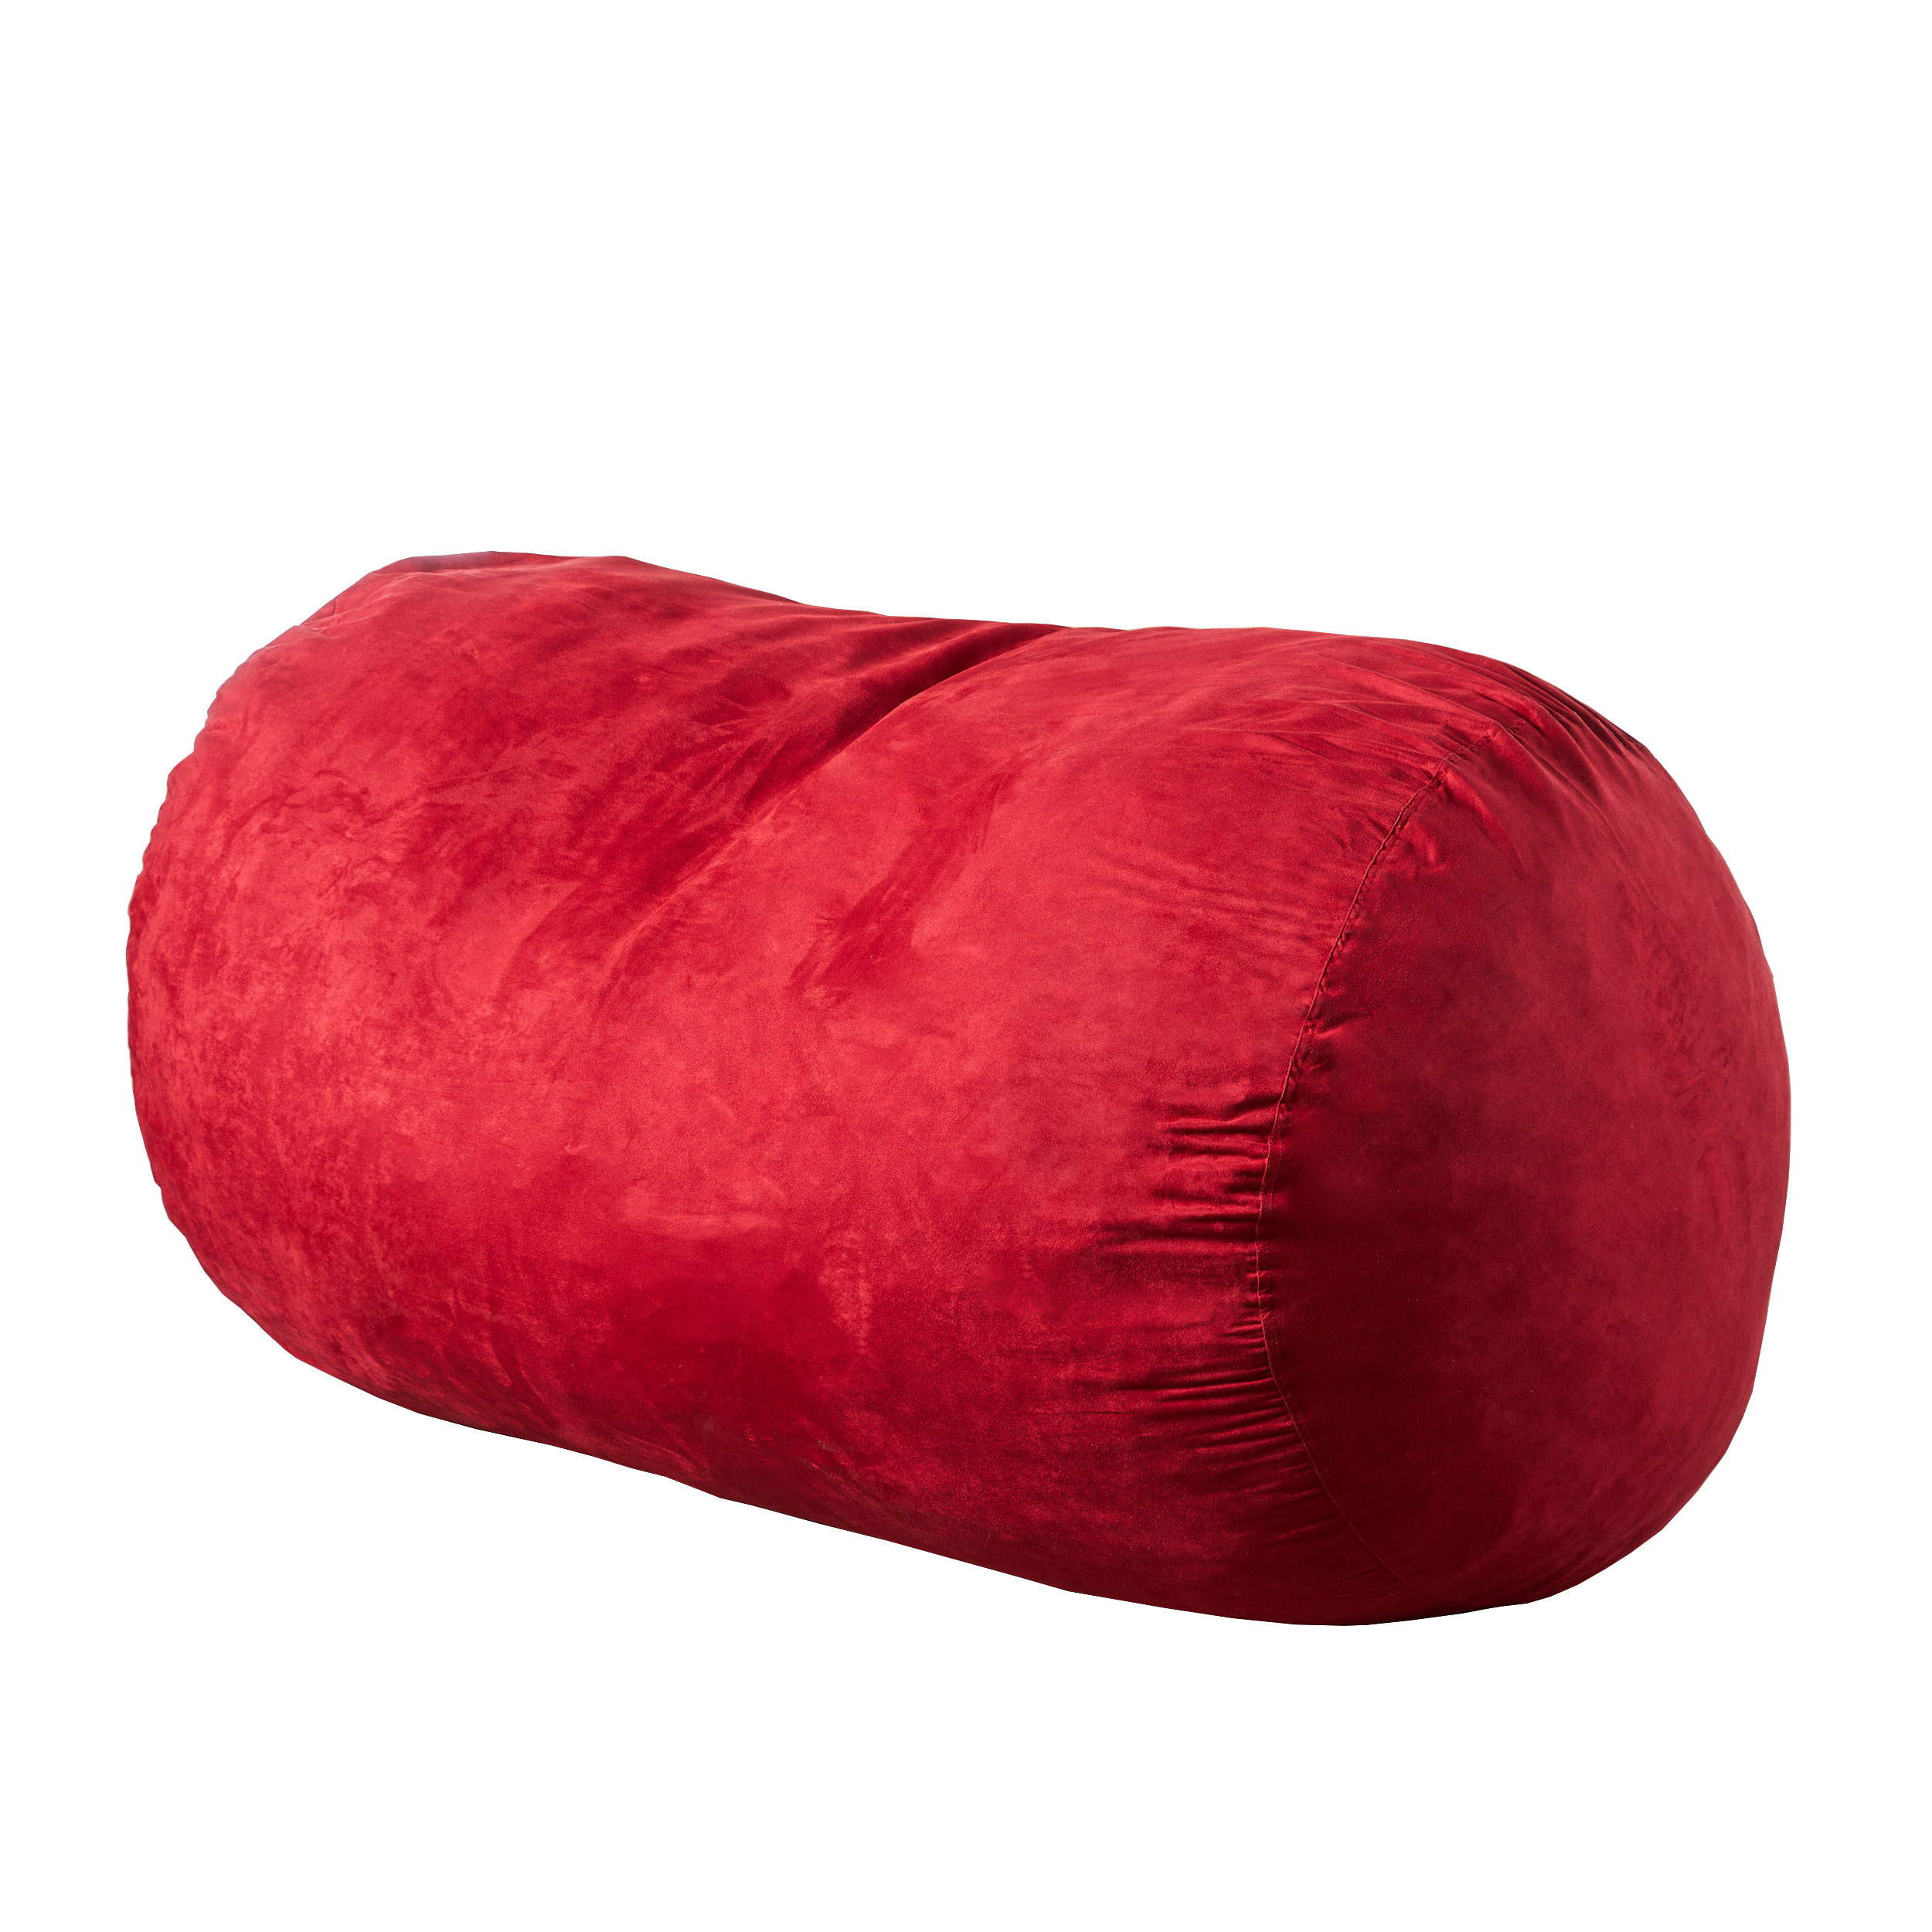 Flora Traditional 6.5 Foot Suede Bean Bag (Cover Only), Charcoal - Chinese Red